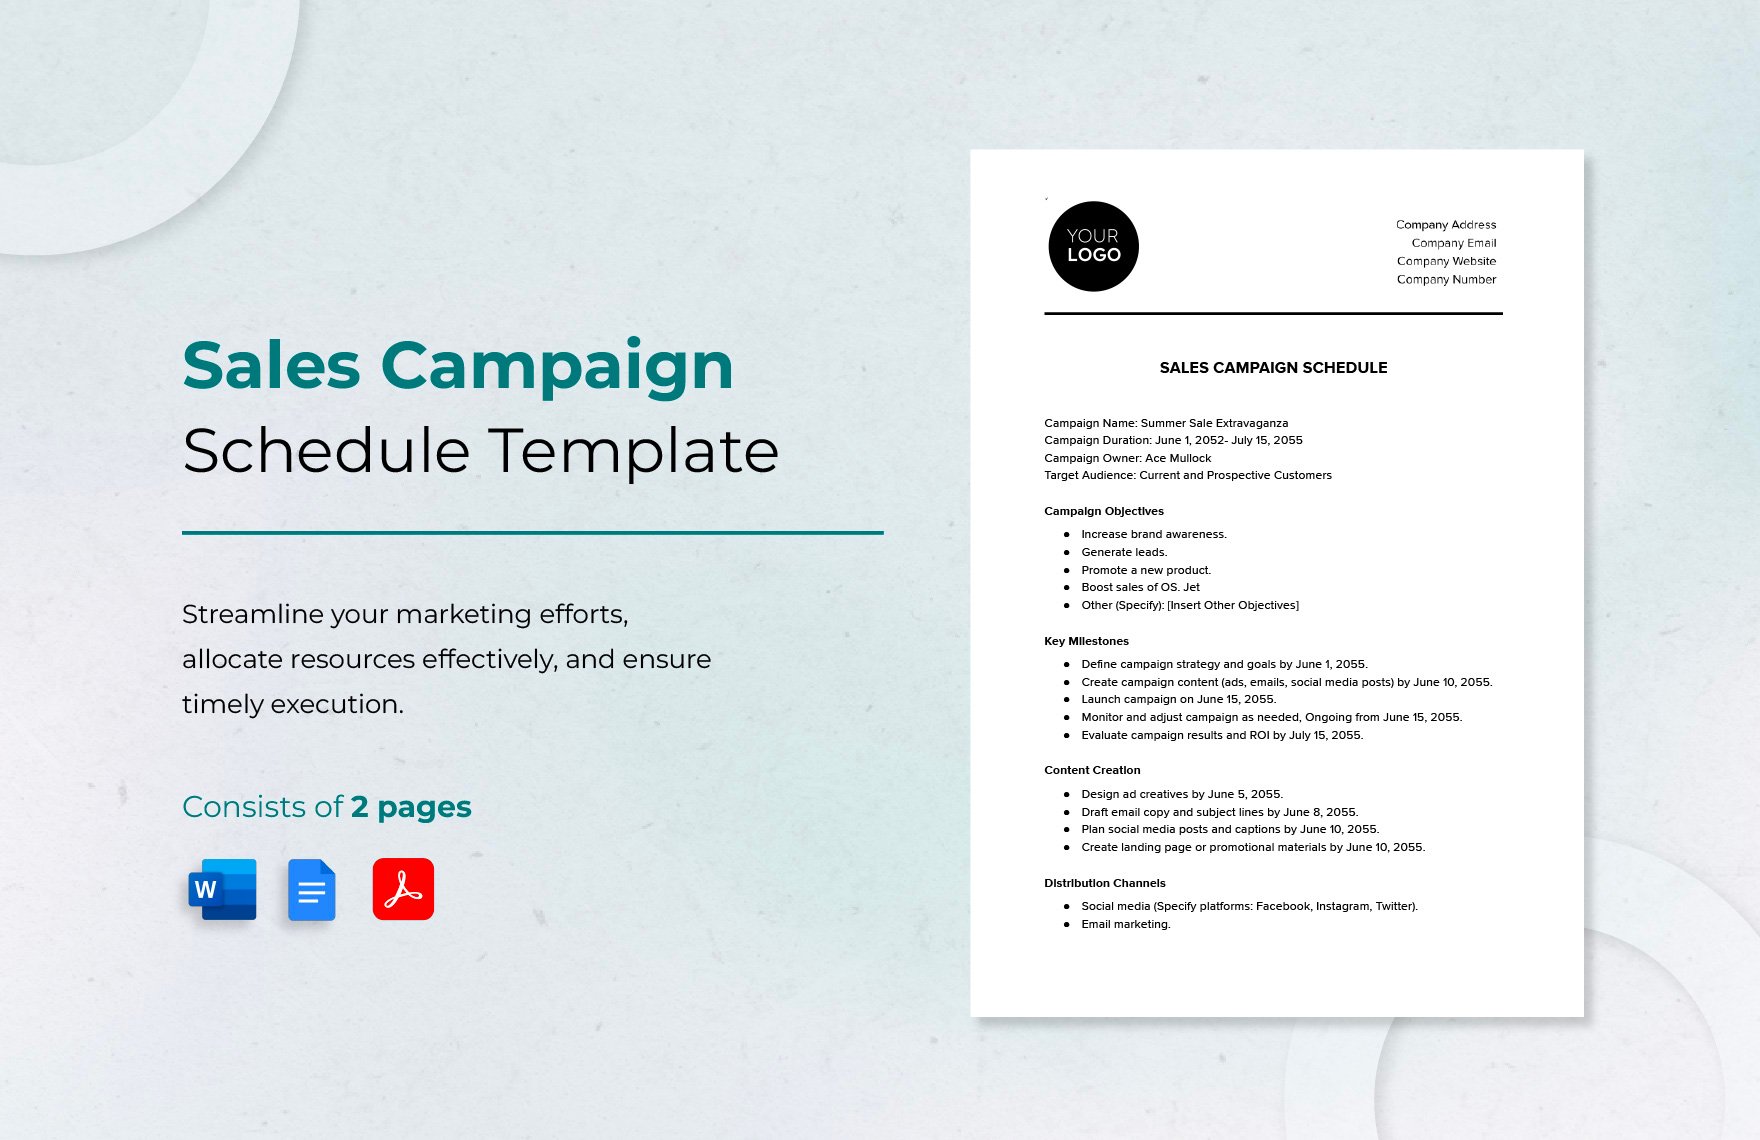 Sales Campaign Schedule Template in Word, Google Docs, PDF